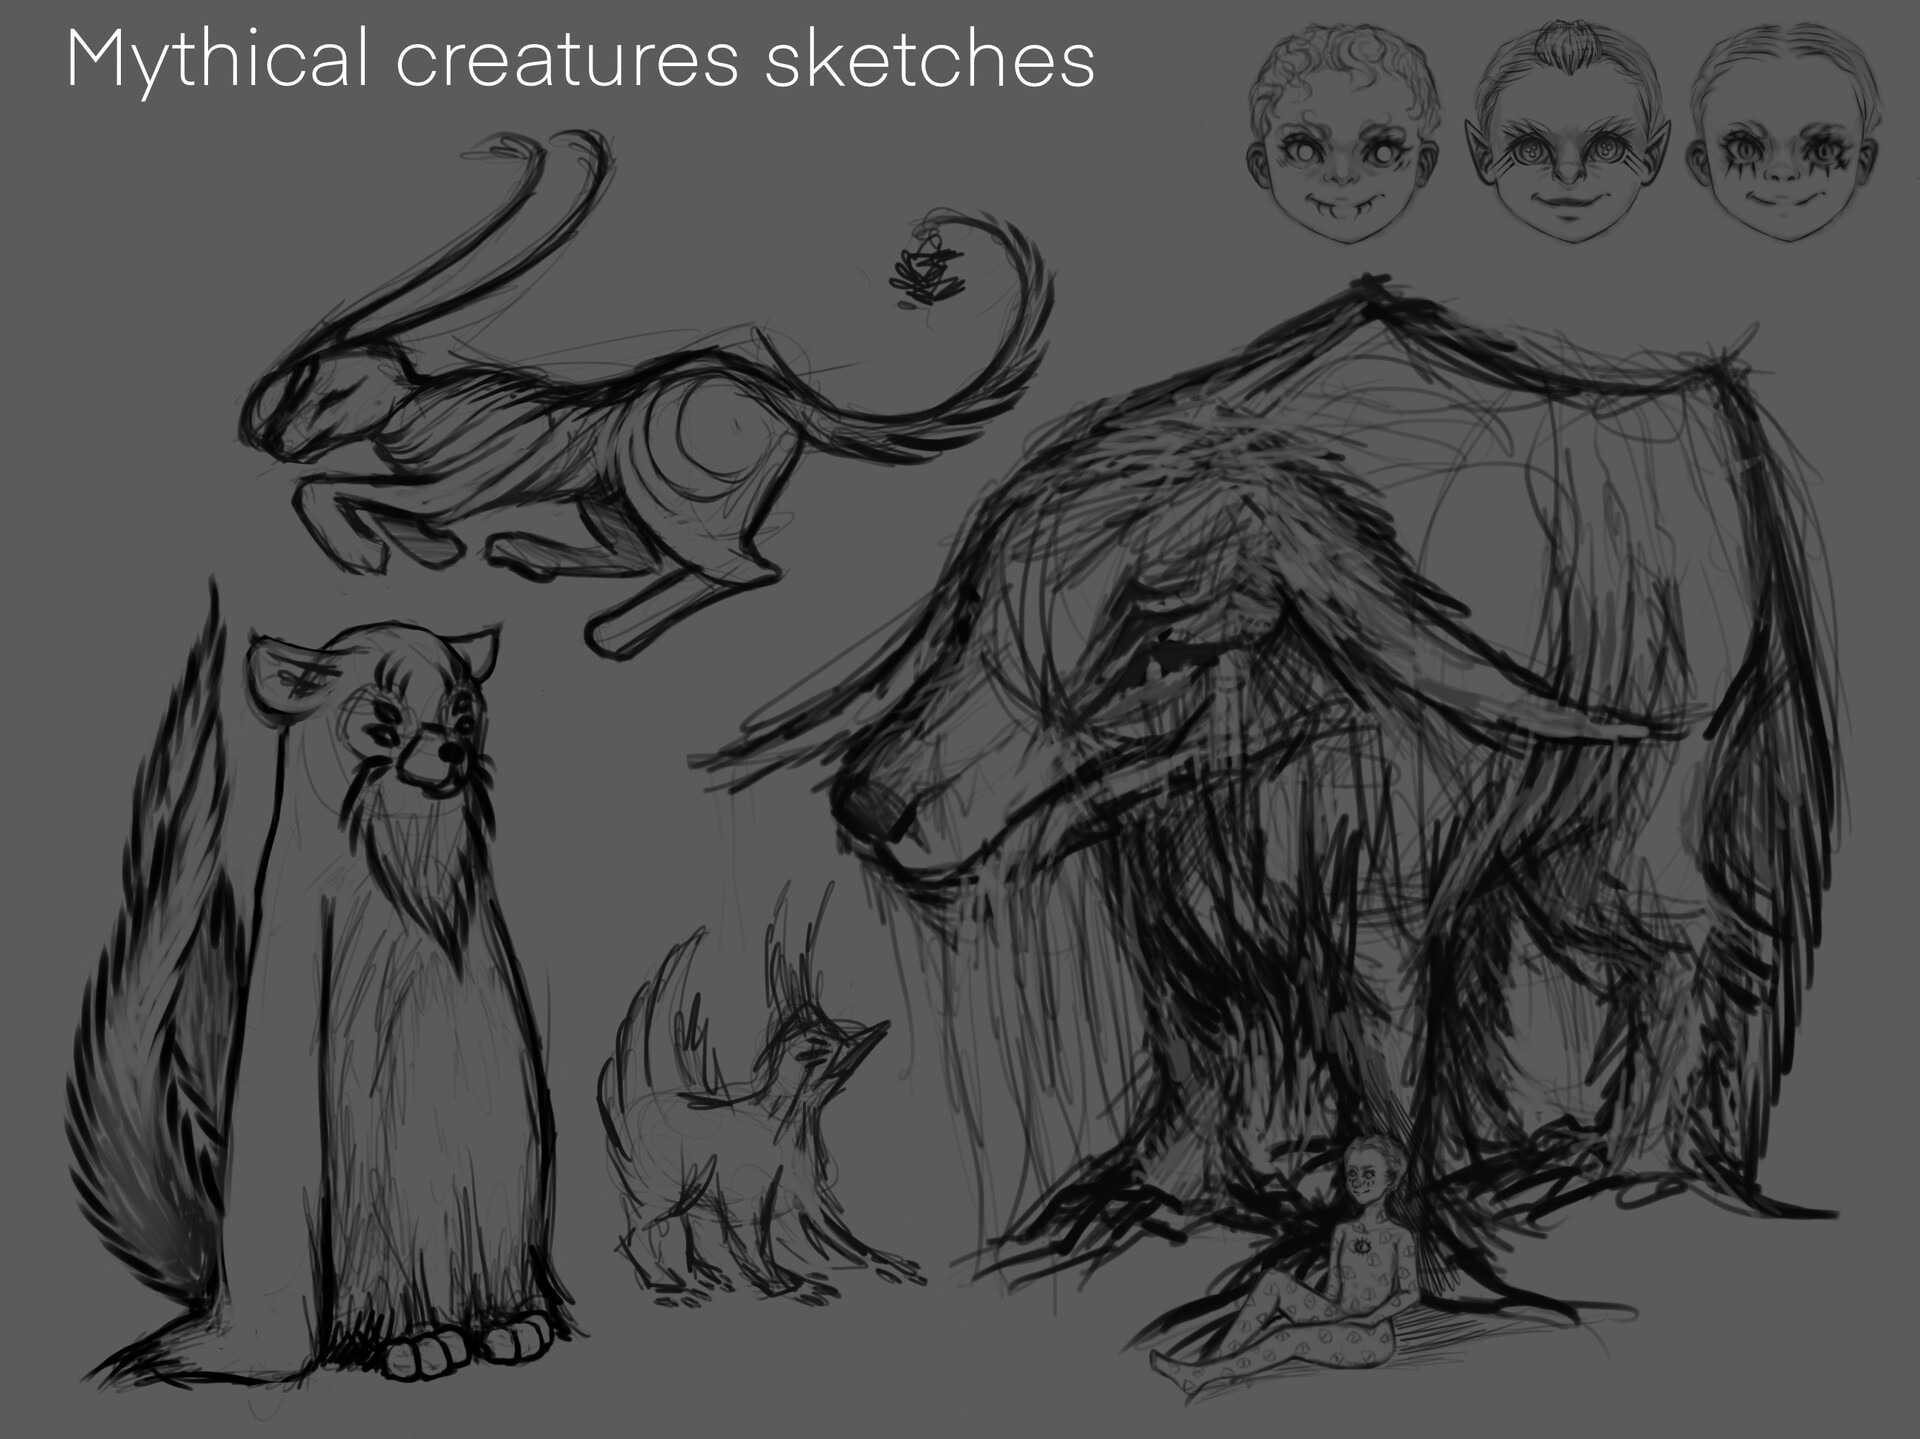 Drawing Mythical Creatures Helps Deal With My Social Anxiety Disorder   Bored Panda